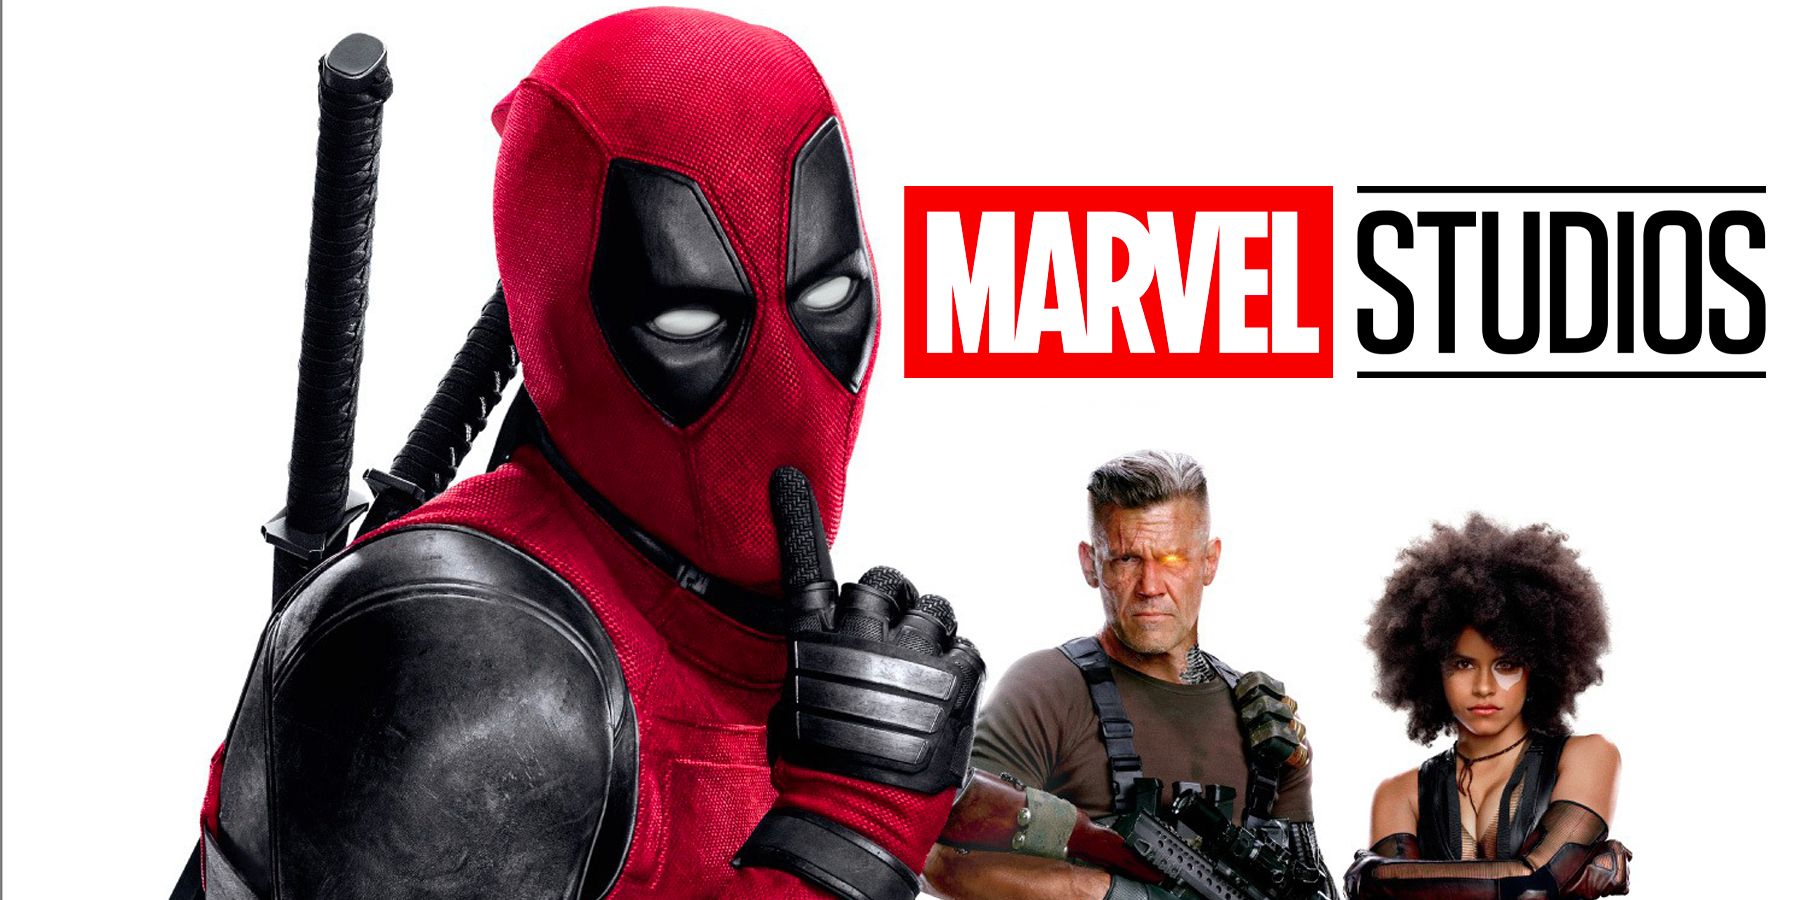 Ryan Reynolds Reacts to Deadpool 3 News With Funny Poster